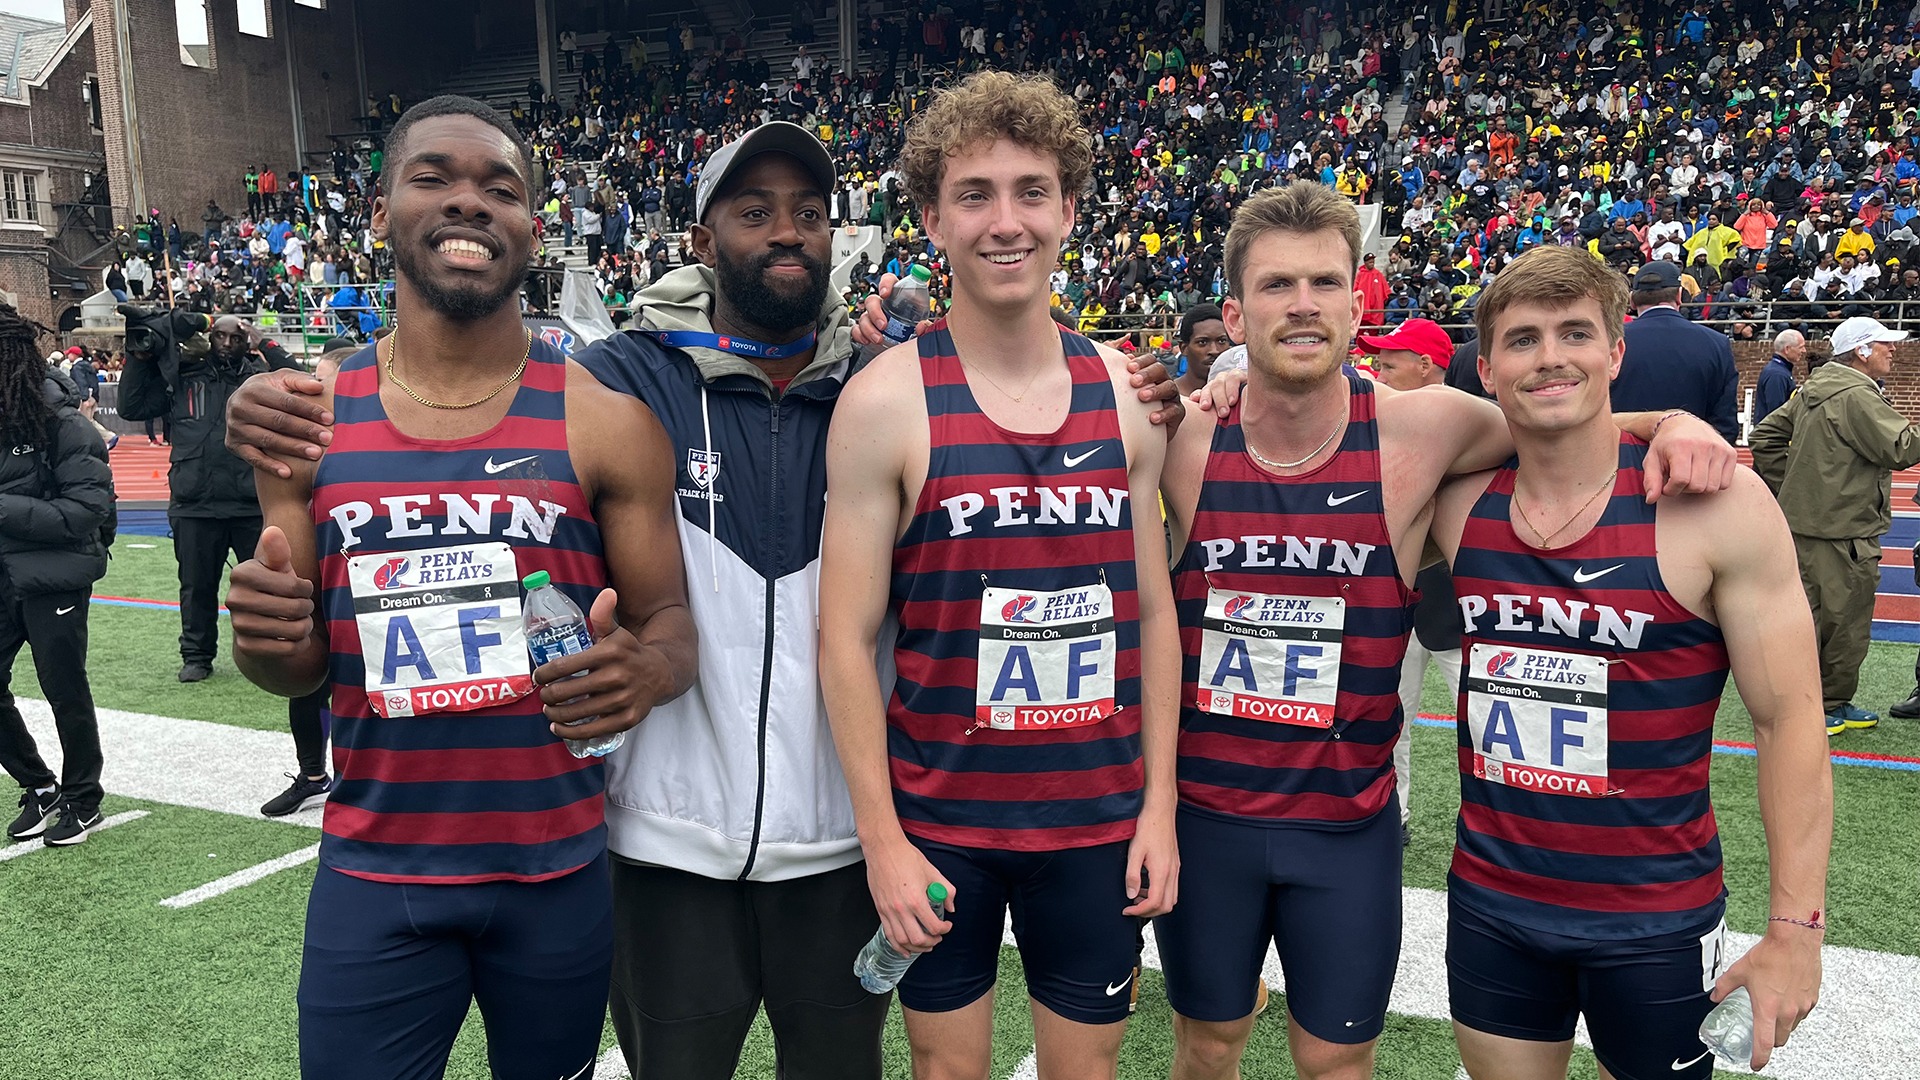 (Left to right) First-year Devante Heywood, Assistant Coach Moose Akanno, first-year Andrew O’Donnell, four-year Robbie Ruppel, and fourth-year Emerson Douds. Heywood, O’Donnell, Ruppel, and Douds finished sixth in the men’s 4x400 Championship of America with a time of 3:08.62, the second-fastest time in program history.